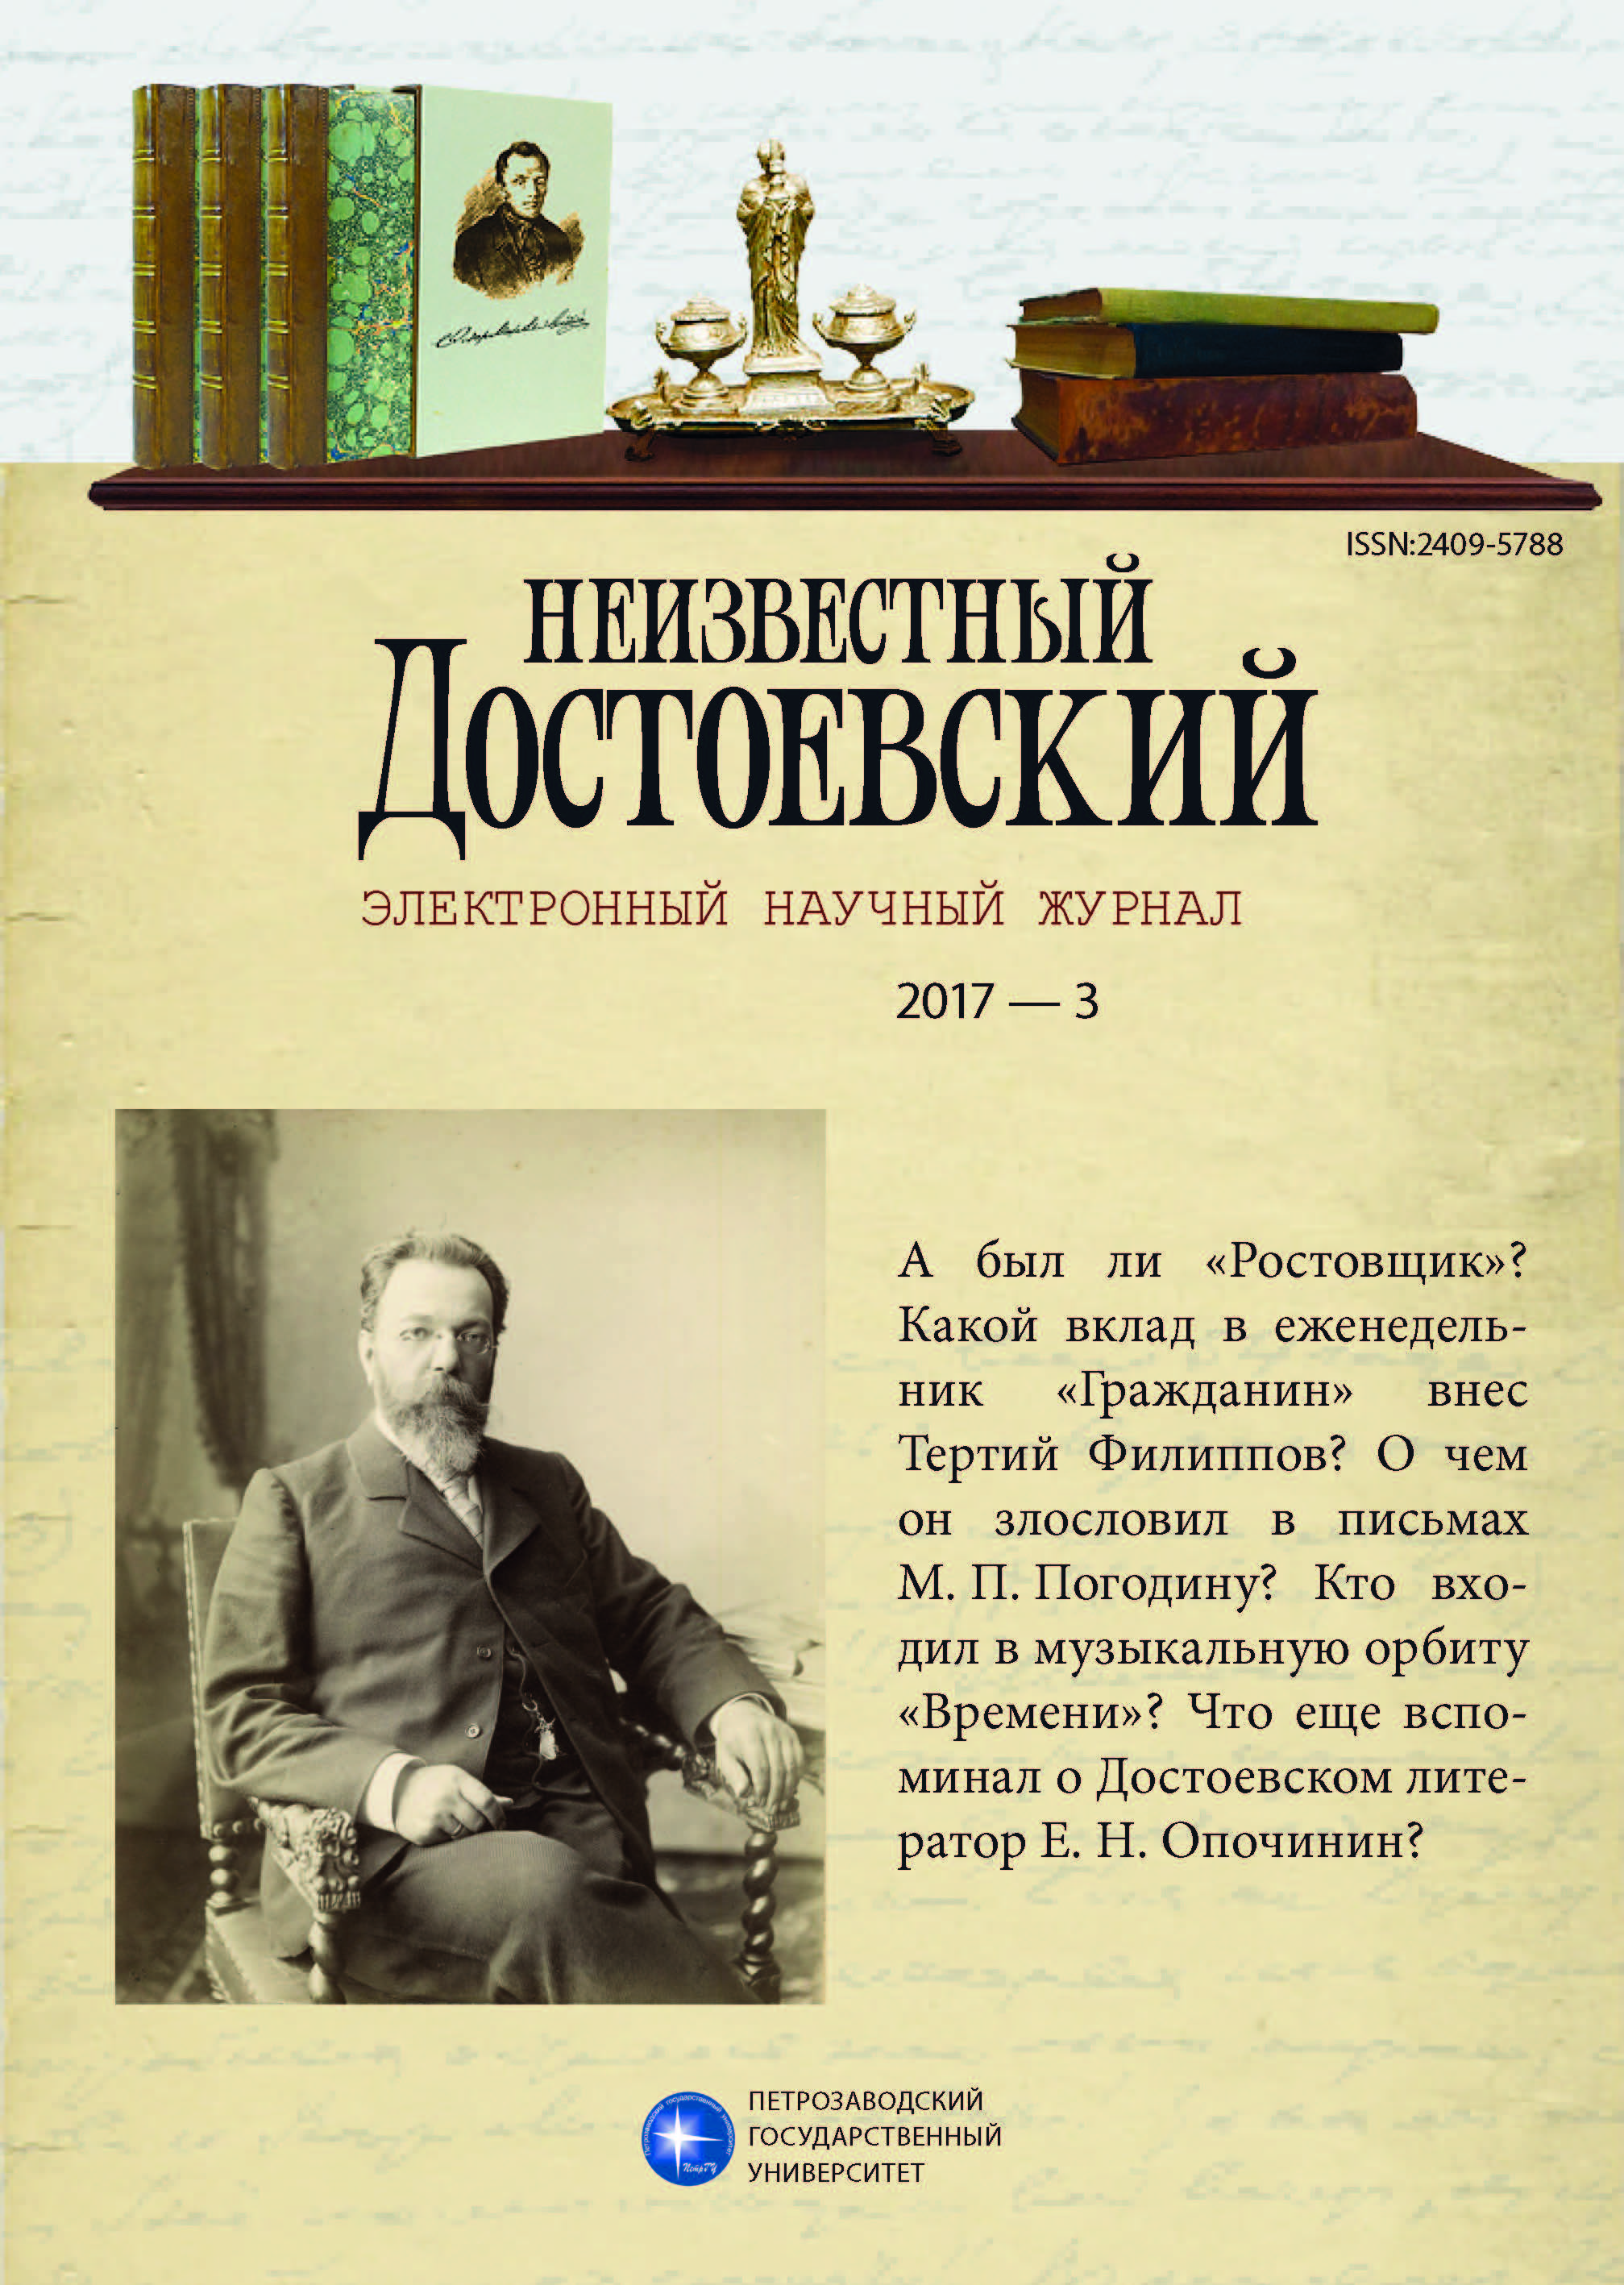 T. I. Filippov as a Writer of the Periodical “Grashdanin” in 1873-1874: Based on Archival Materials Cover Image